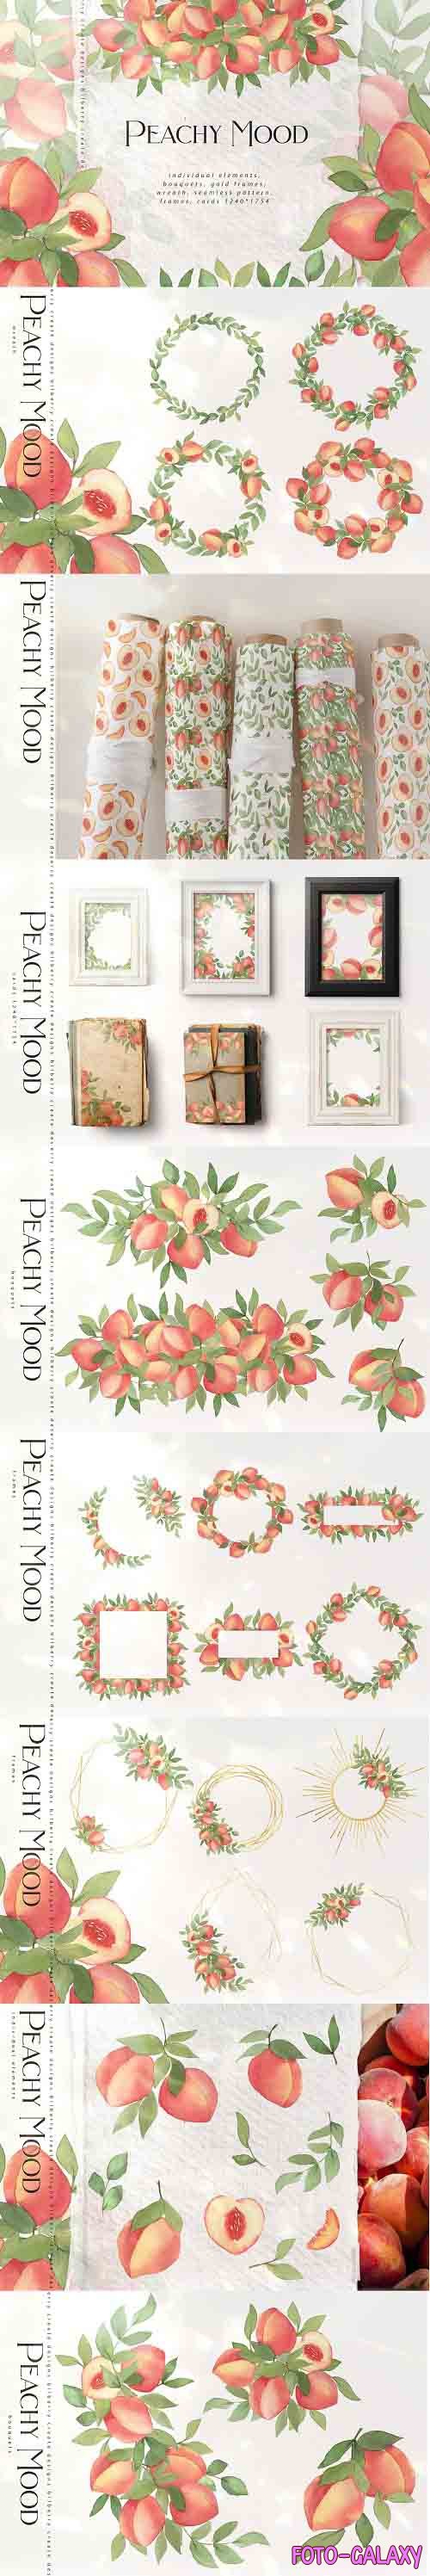 Peachy Mood collection - 6047013